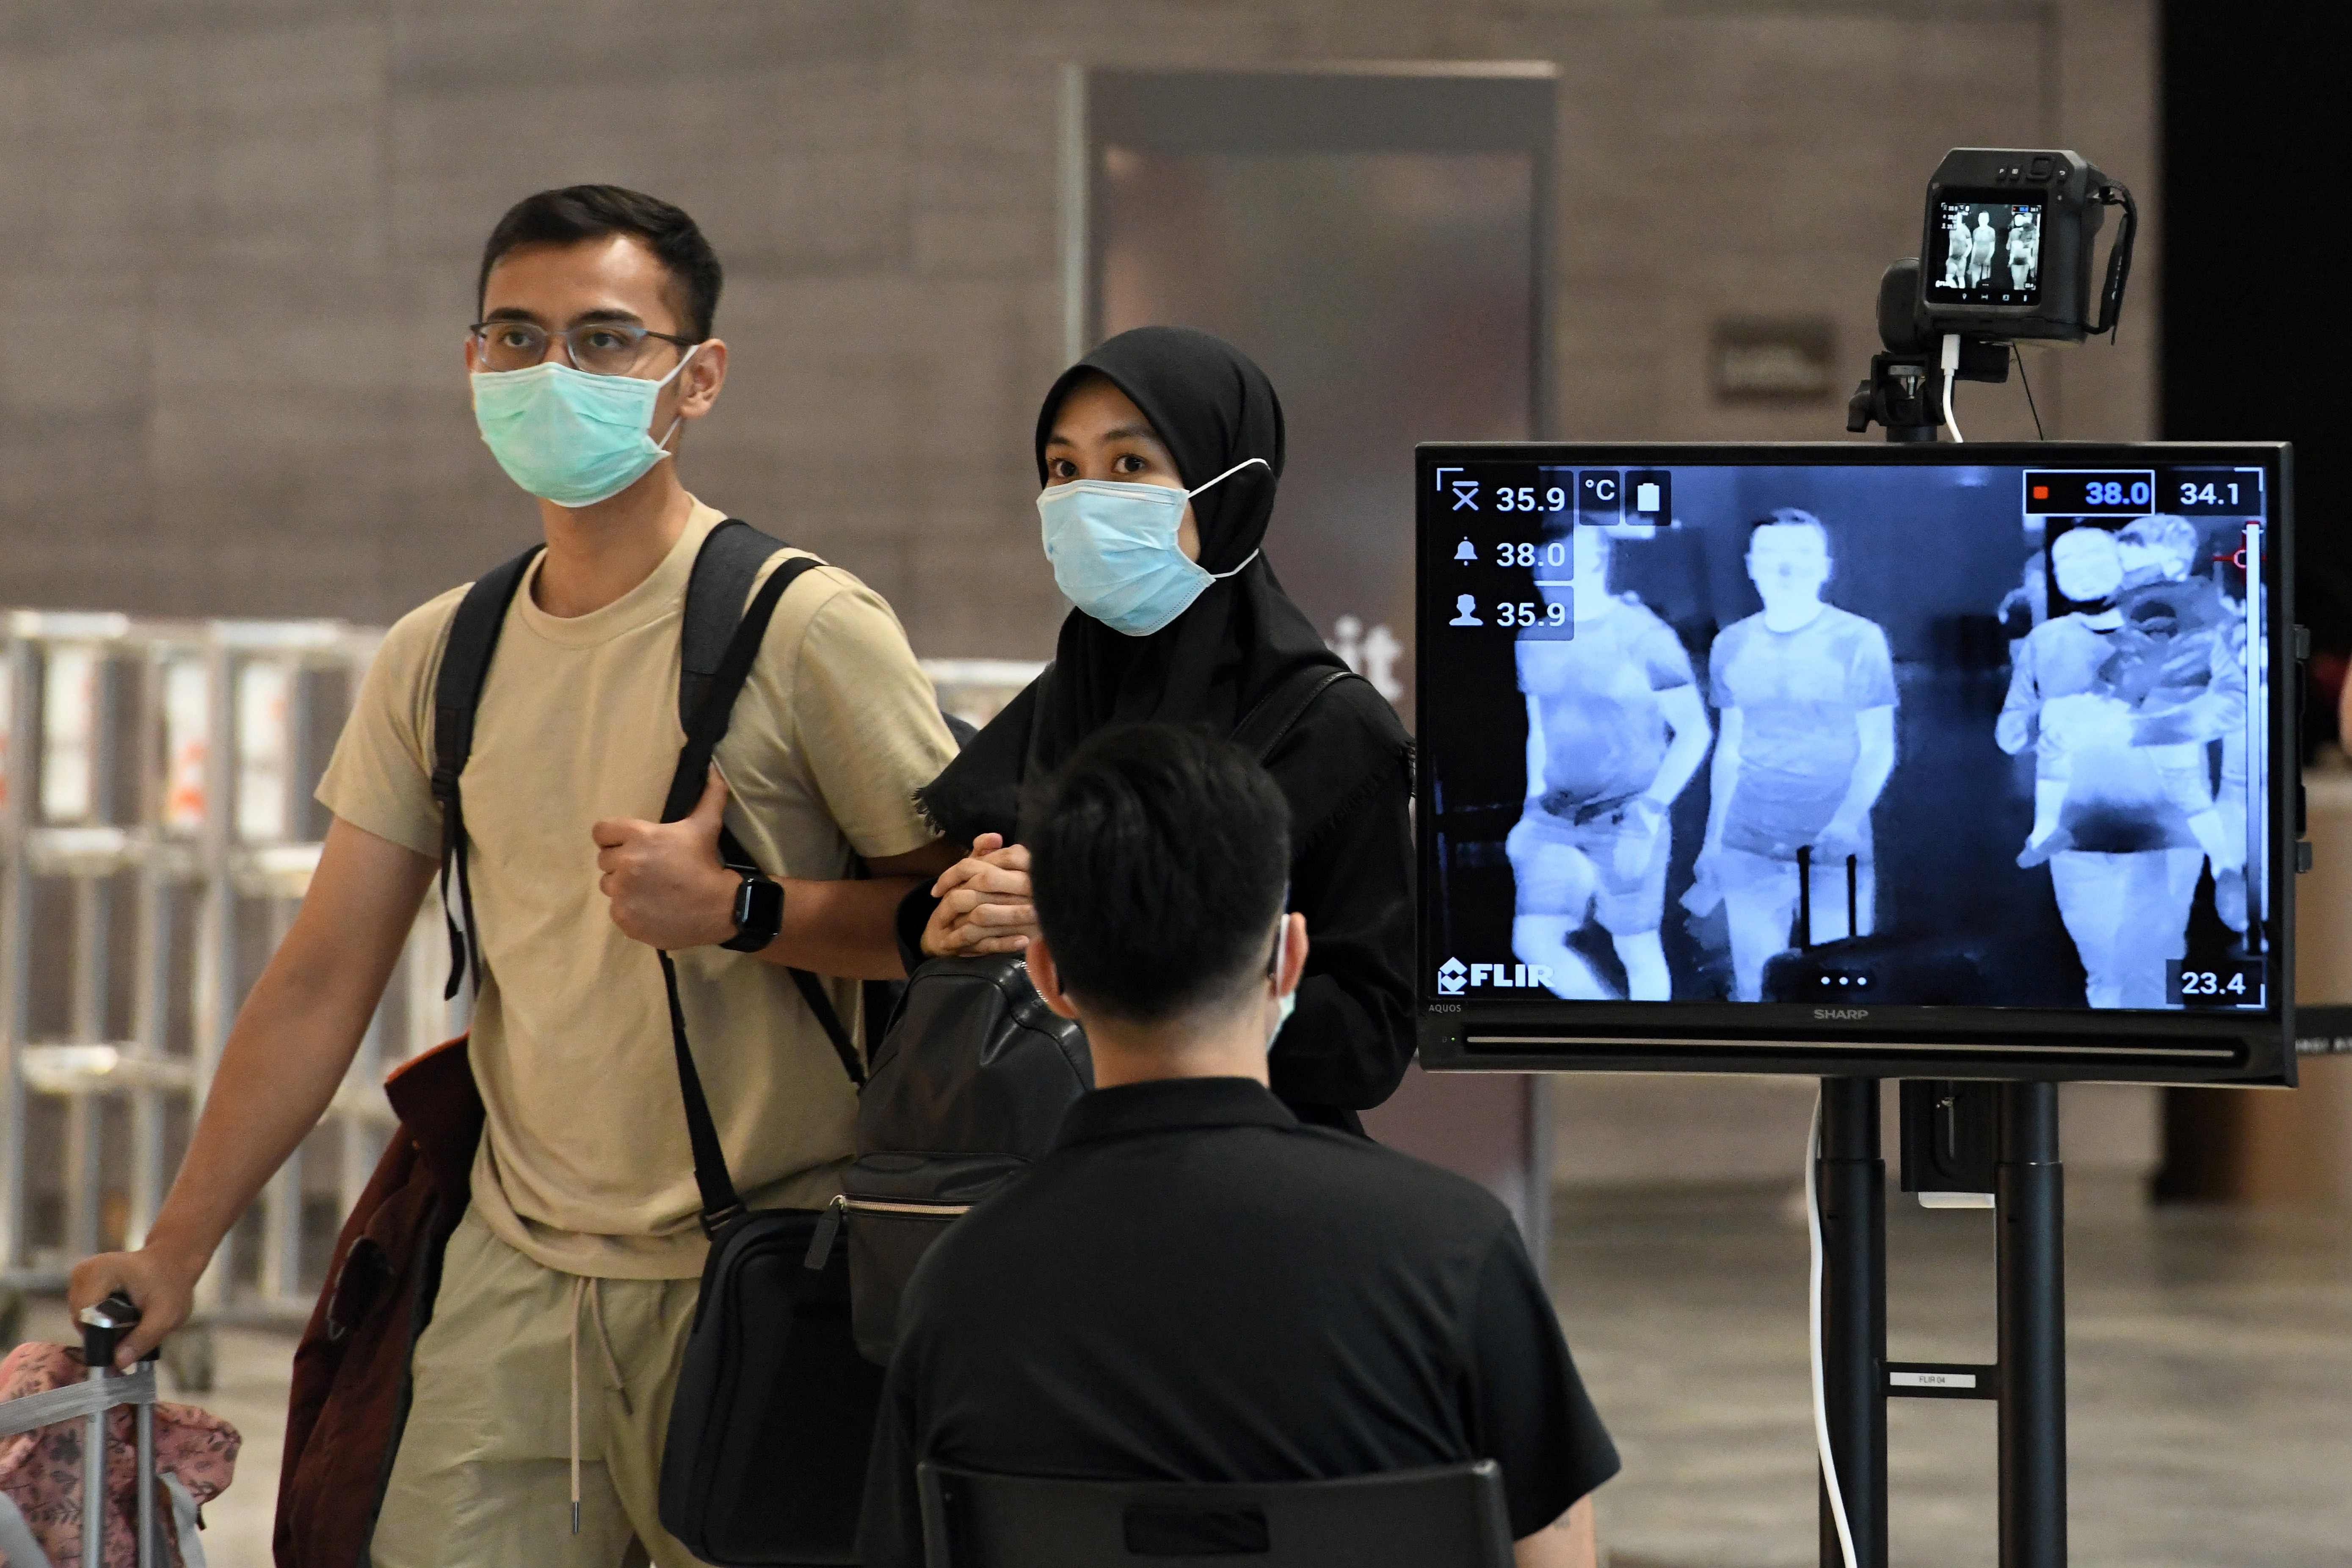 A couple, wearing facemasks amid fears about the spread of the COVID-19 novel coronavirus, walk past a temperature screening check at Changi International Airport. (AFP Photo)